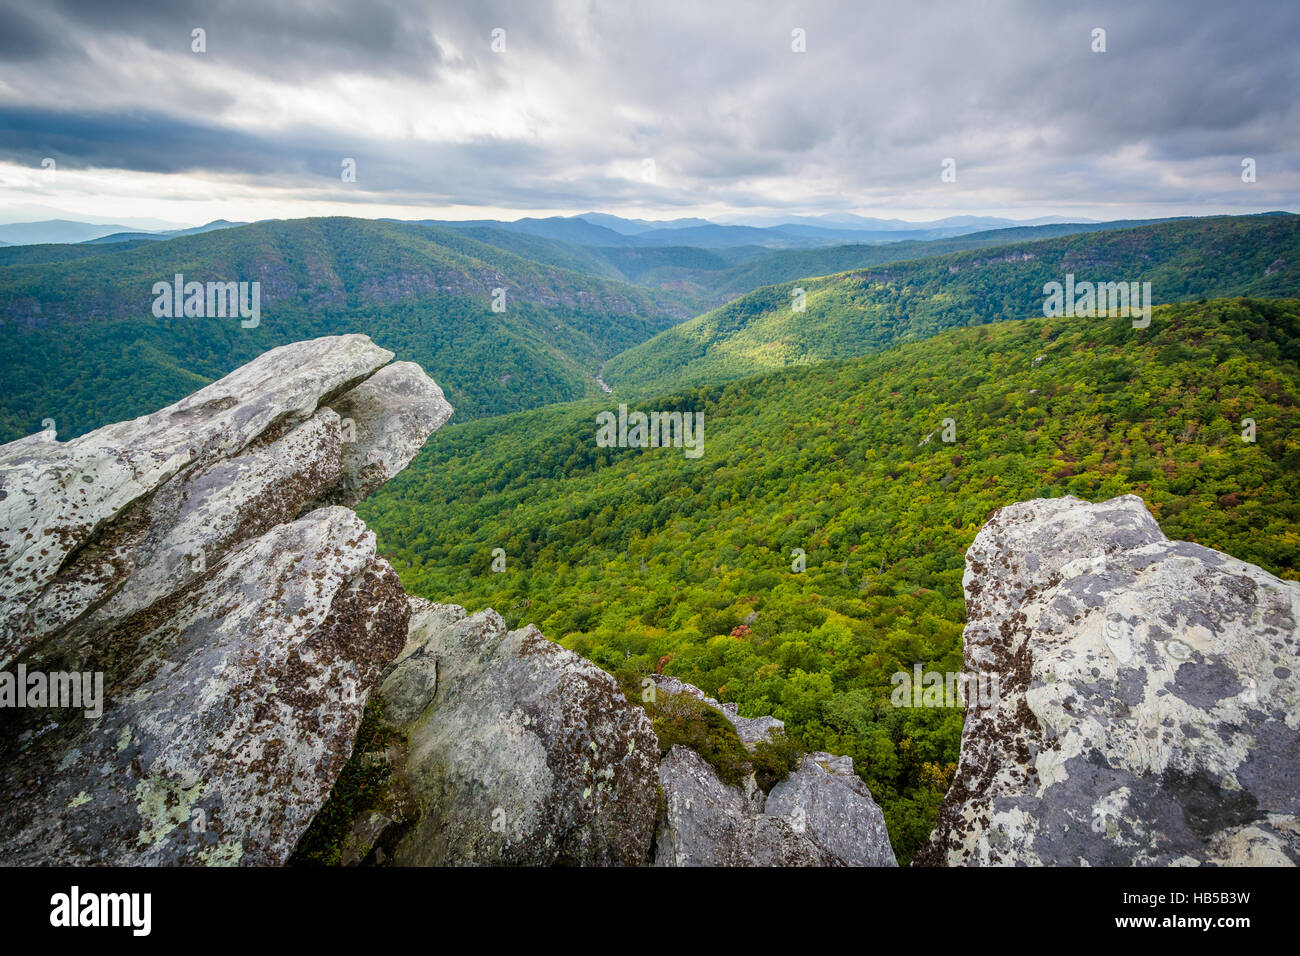 View of the Linville Gorge from Hawksbill Mountain, in Pisgah National Forest, North Carolina. Stock Photo